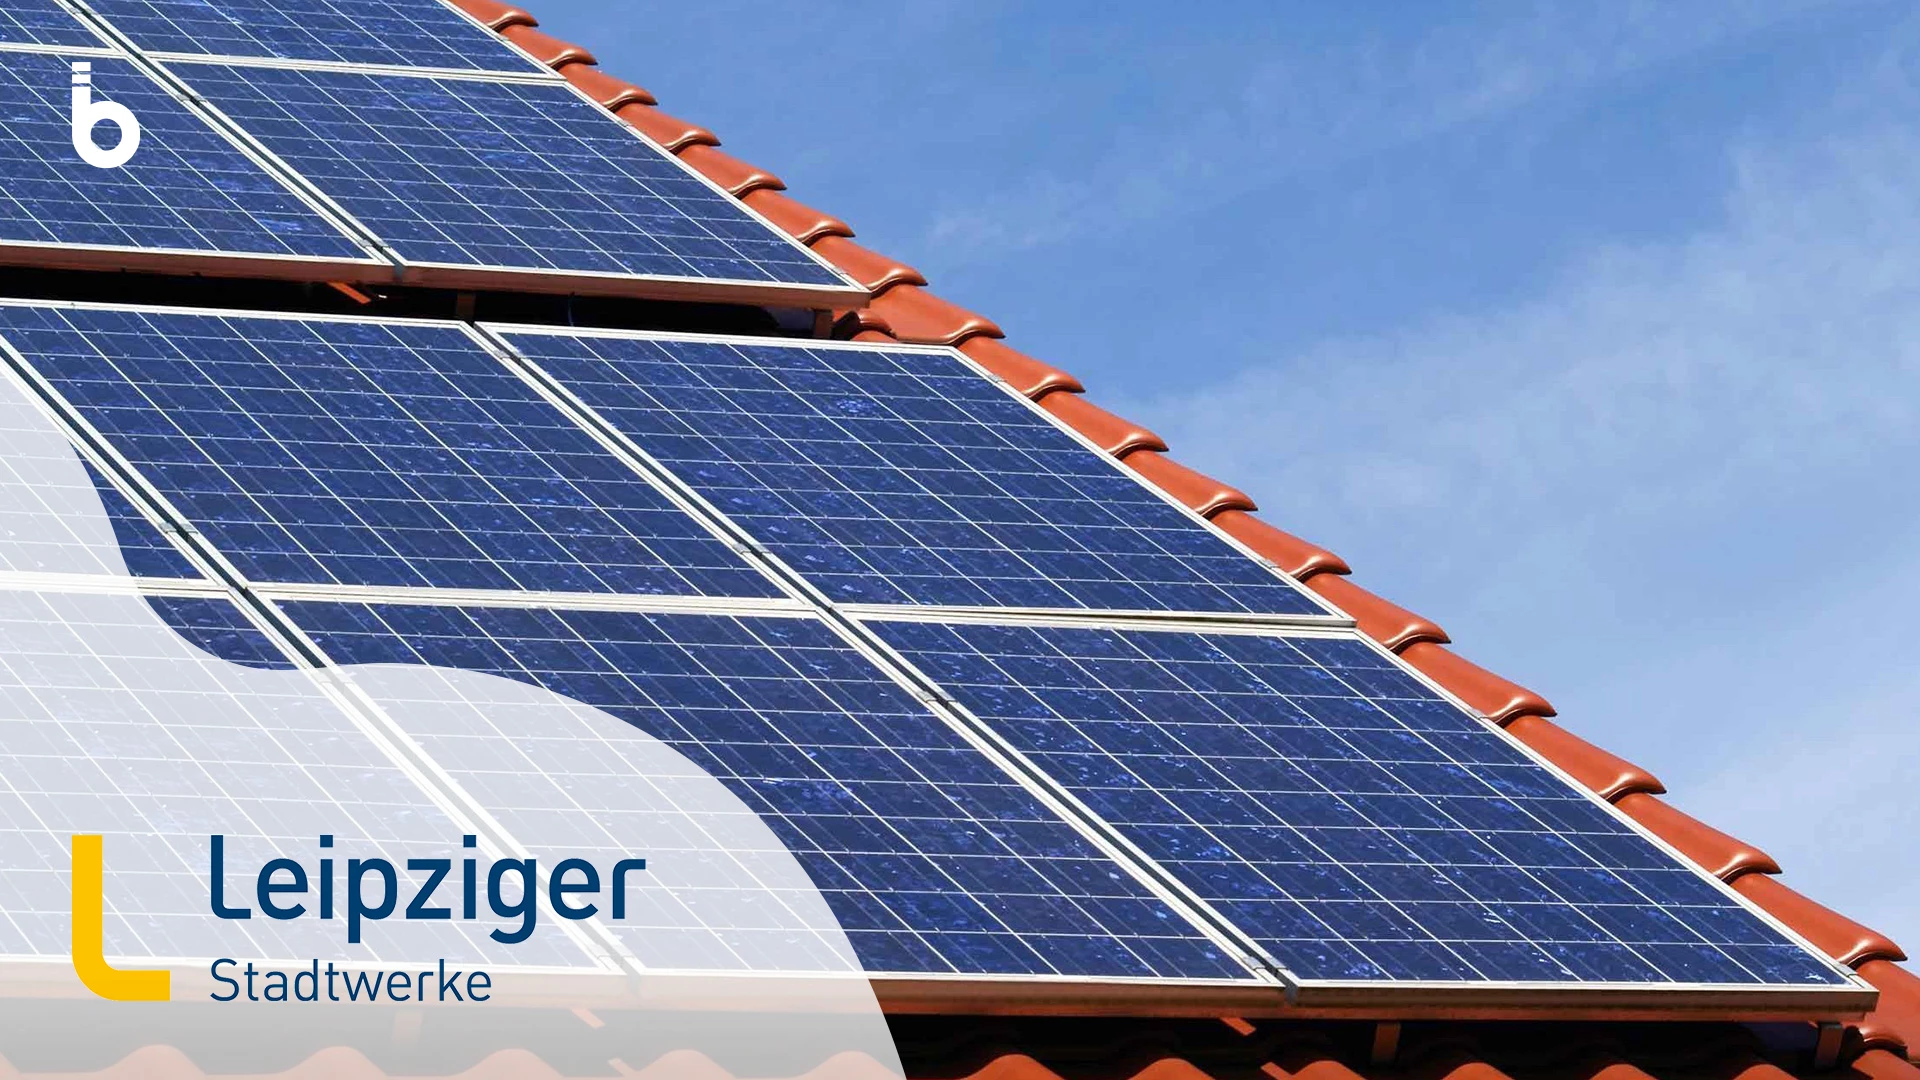 When future becomes more unpredictable, companies need to be prepared. With Board&#039;s Intelligent Planning Platform, Leipziger Stadtwerke are strengthening their position.